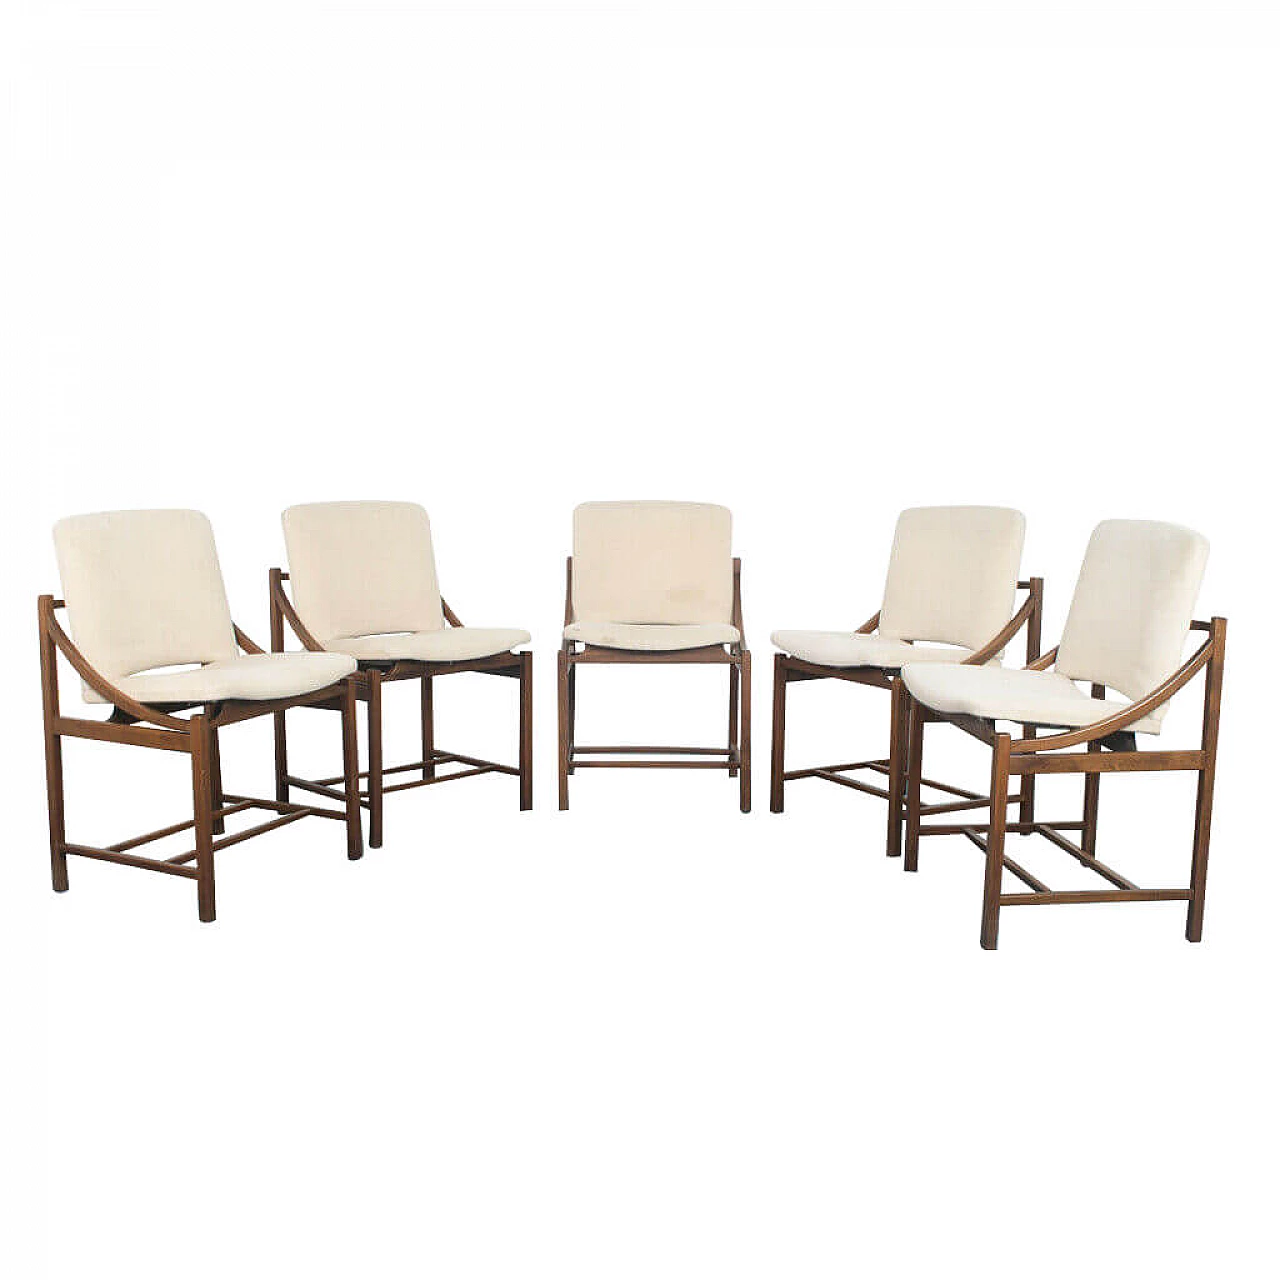 5 Dining chairs in Ico Parisi style, 70s 1178689